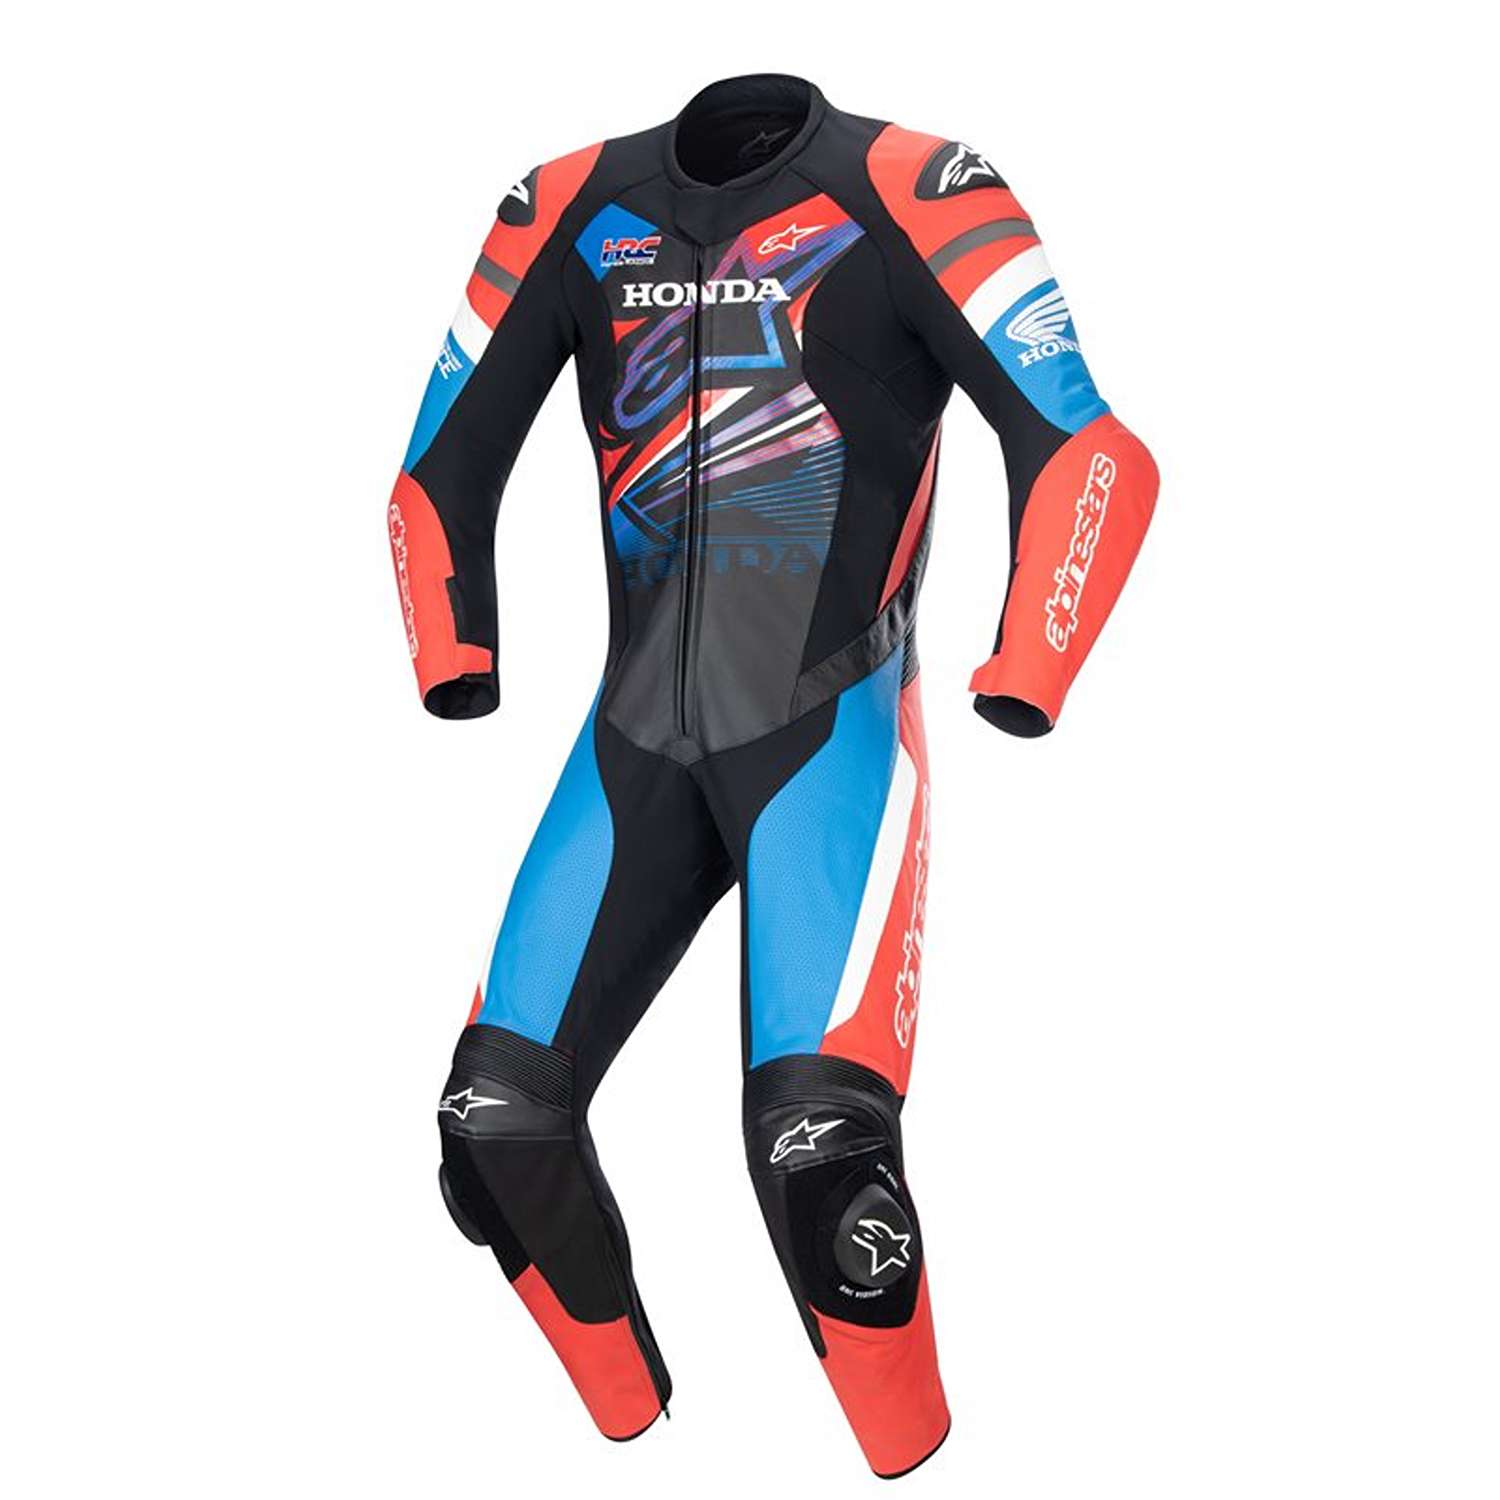 Image of EU Alpinestars Honda Gp Force Leather Suit Black Bright Red Blue Taille 54